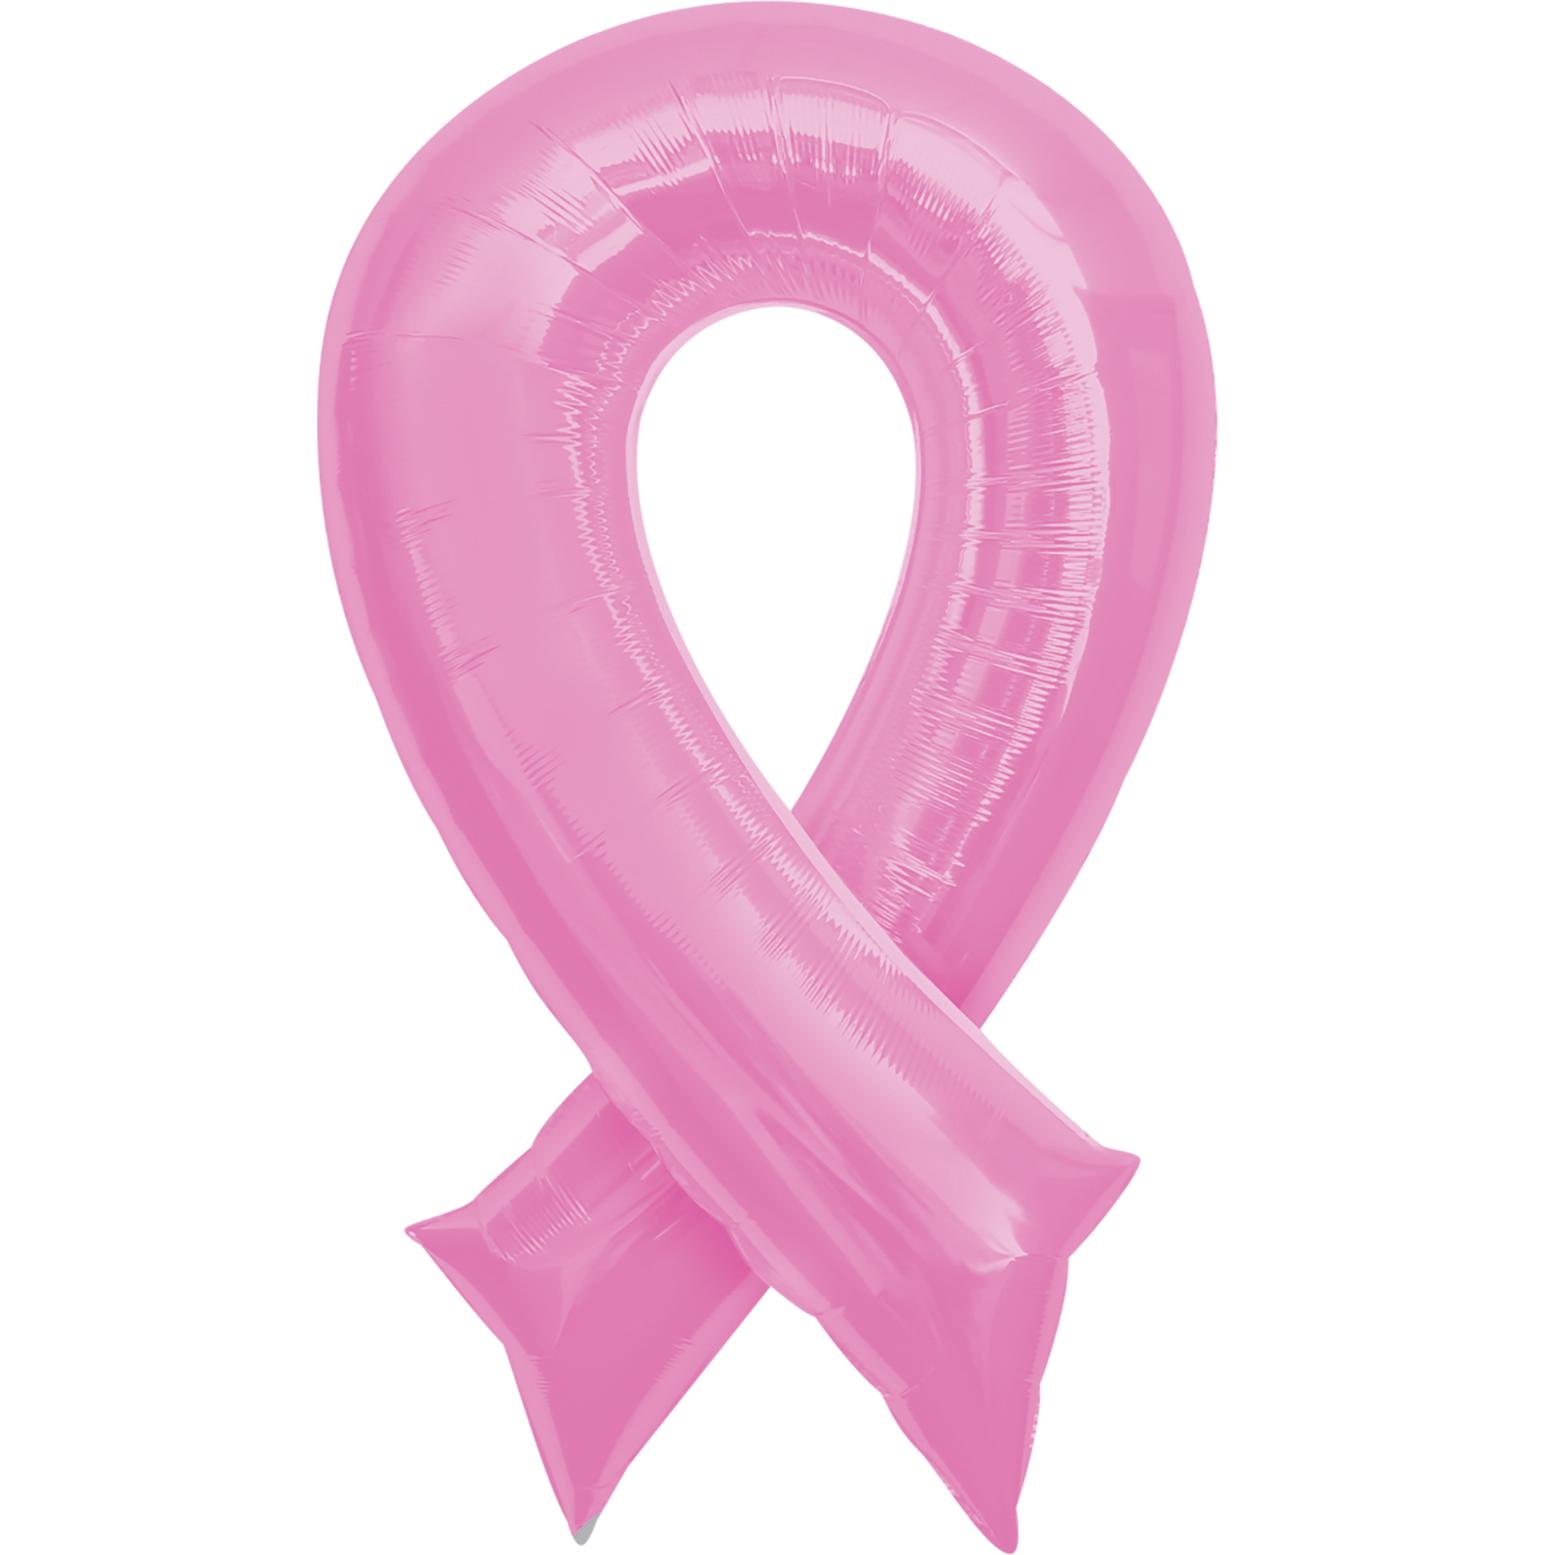 Pink Ribbon Supershape Balloon 36in Balloons & Streamers - Party Centre